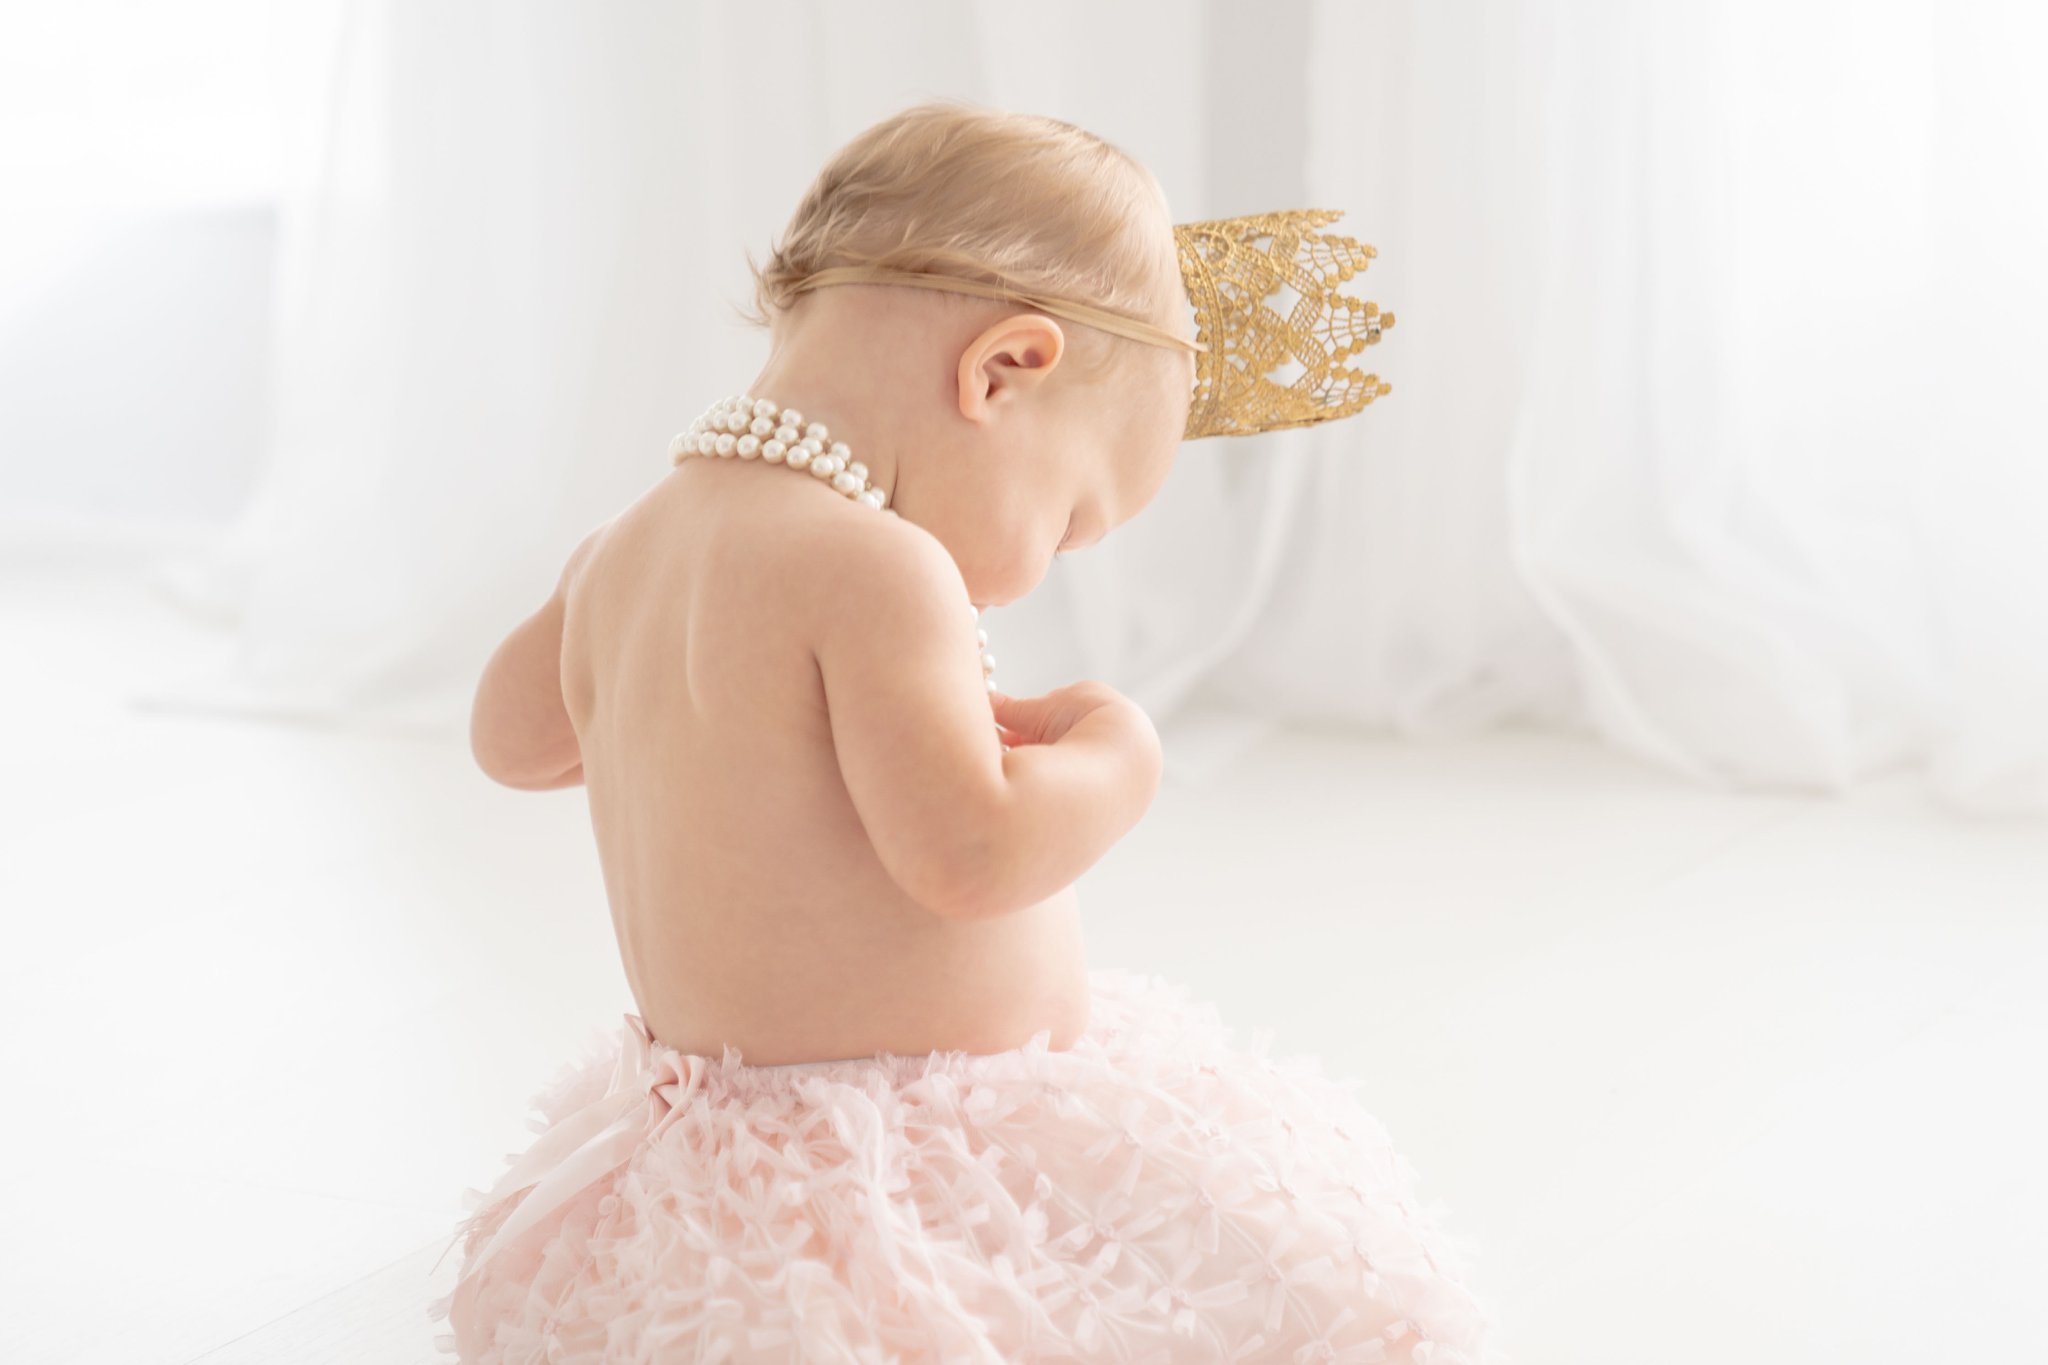 Baby girl being photographed in a Jupiter florida photography studio in a Chanel style blush pink skirt and princess crown